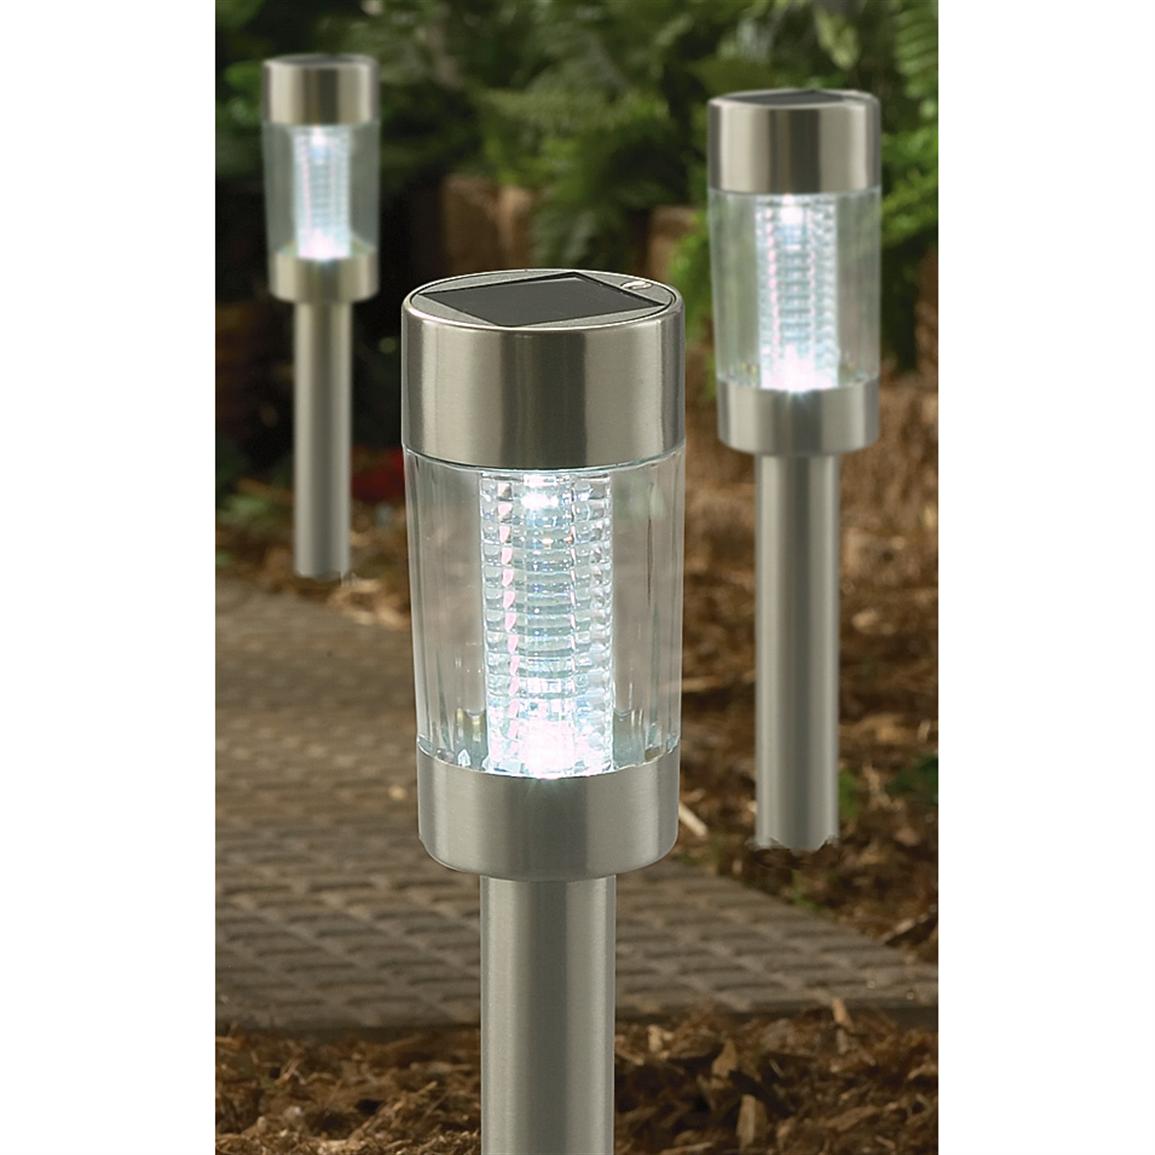 10 - Pc. Westinghouse® Stainless Steel Solar Pathway Lights - 164819 Stainless Steel Solar Path Lights